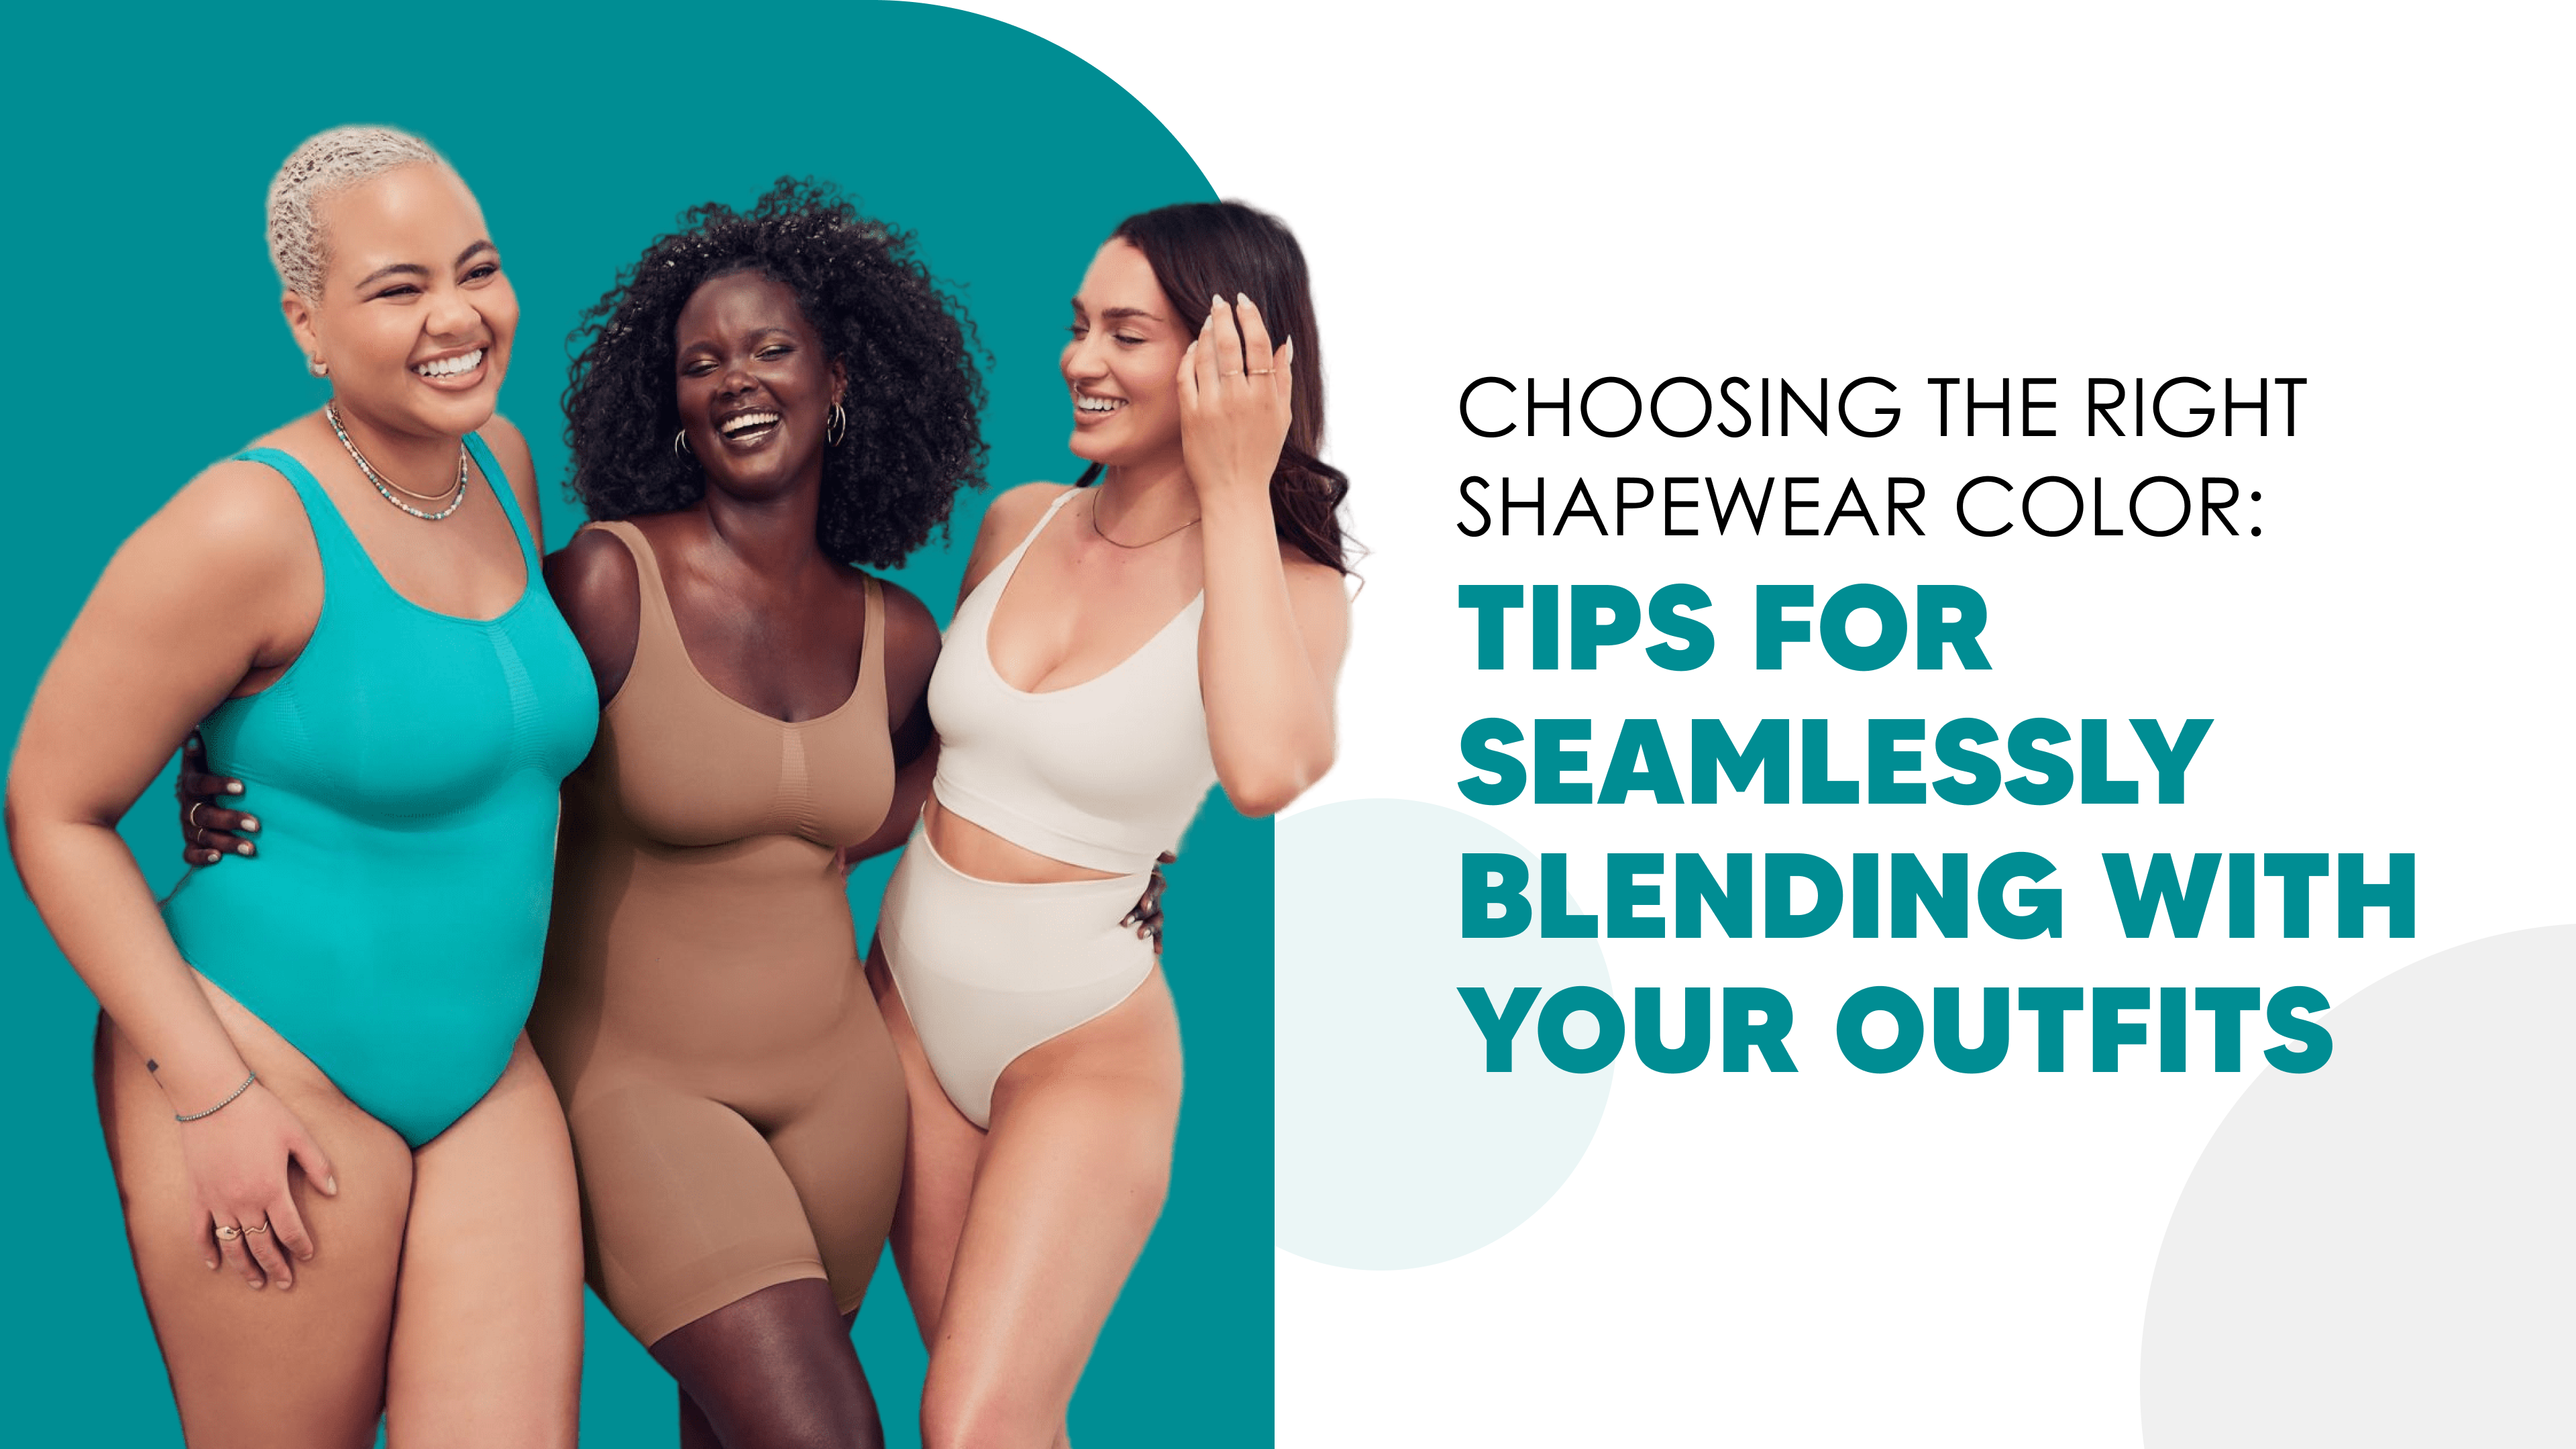 Choosing the Right Shapewear Color: Tips for Seamlessly Blending with Your Outfits